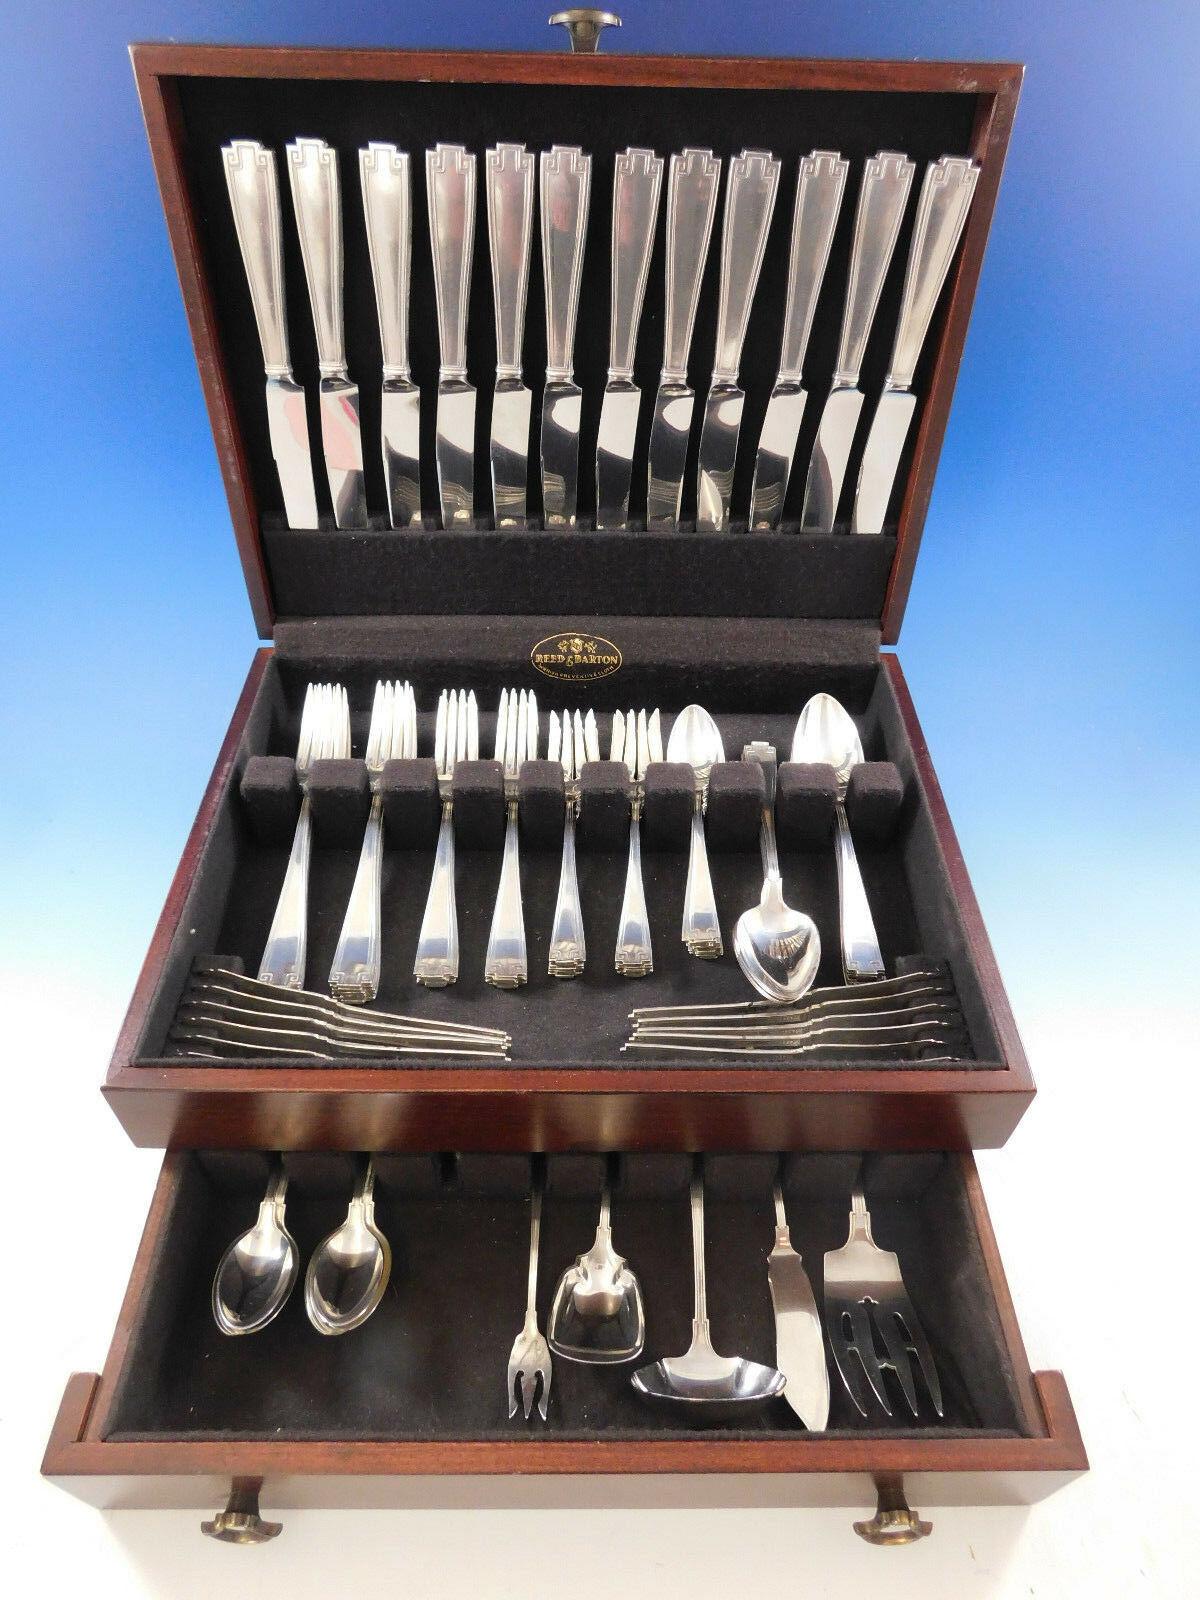 Dinner Size Etruscan by Gorham sterling silver Flatware set, 101 pieces. This set includes:

12 Dinner Size Knives, 9 1/2